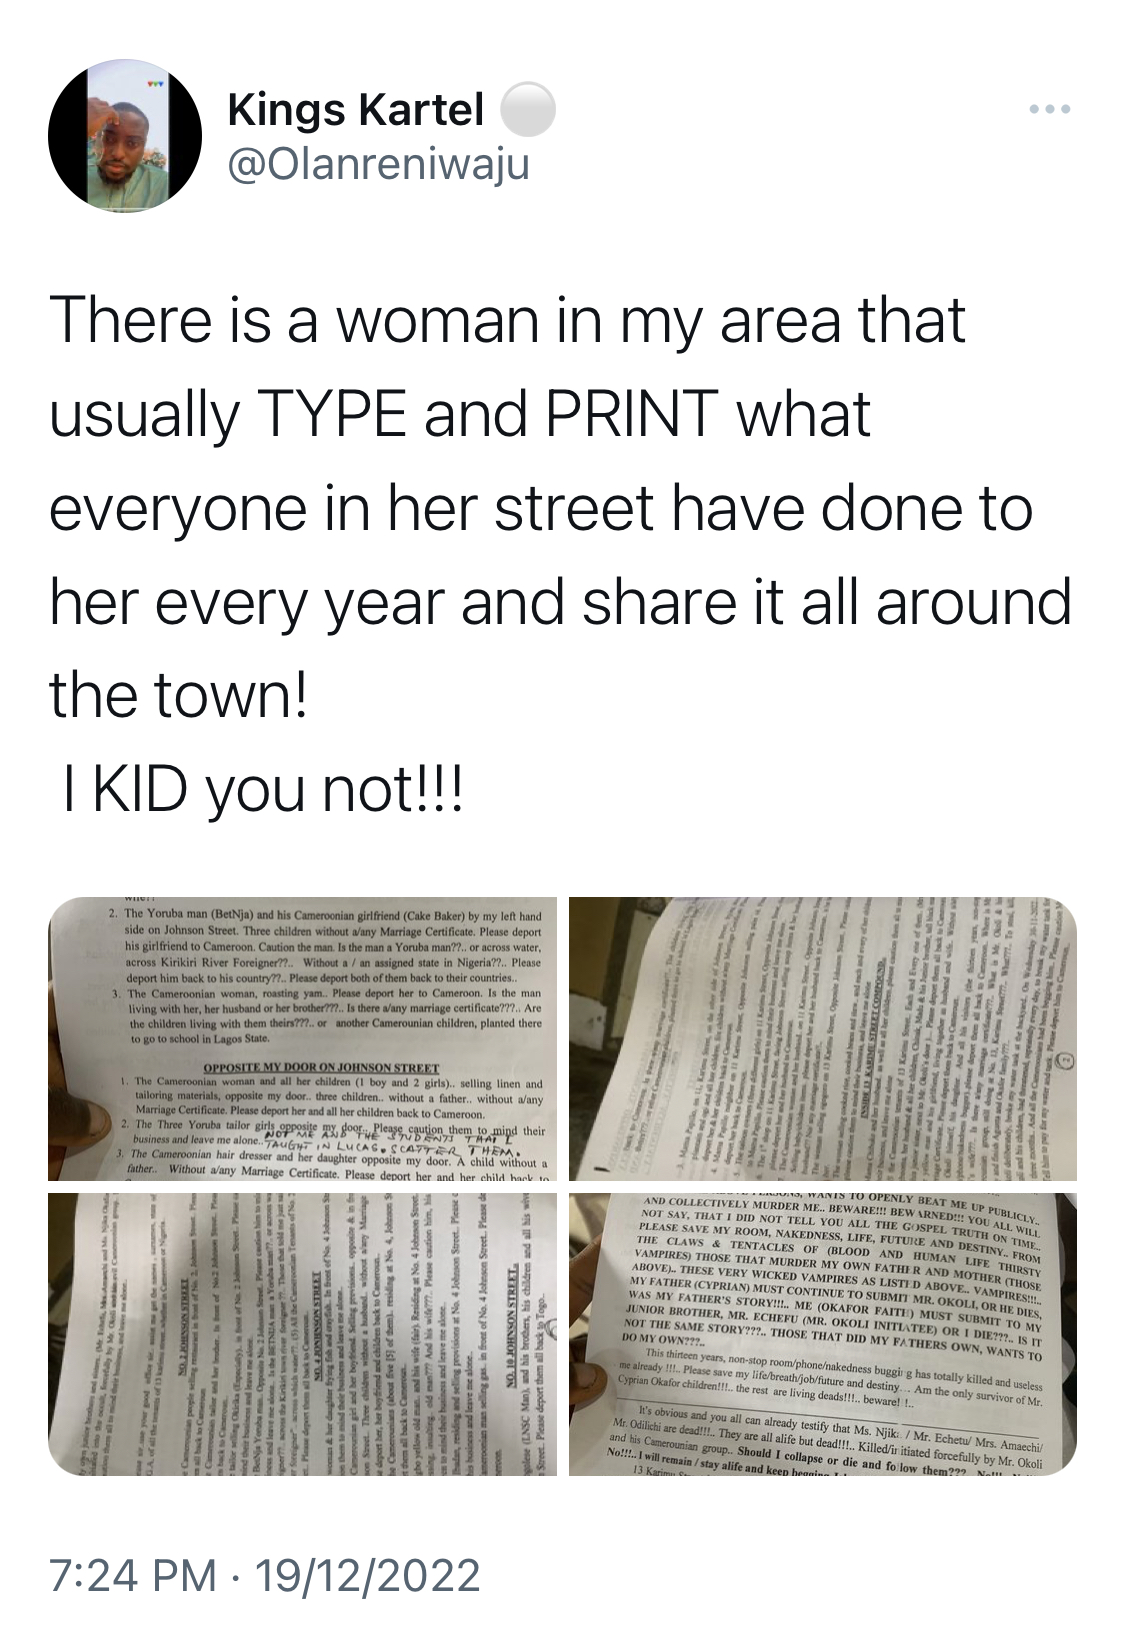 End of year Drama as woman writes and prints offenses by Neighbours against her annually [photos]